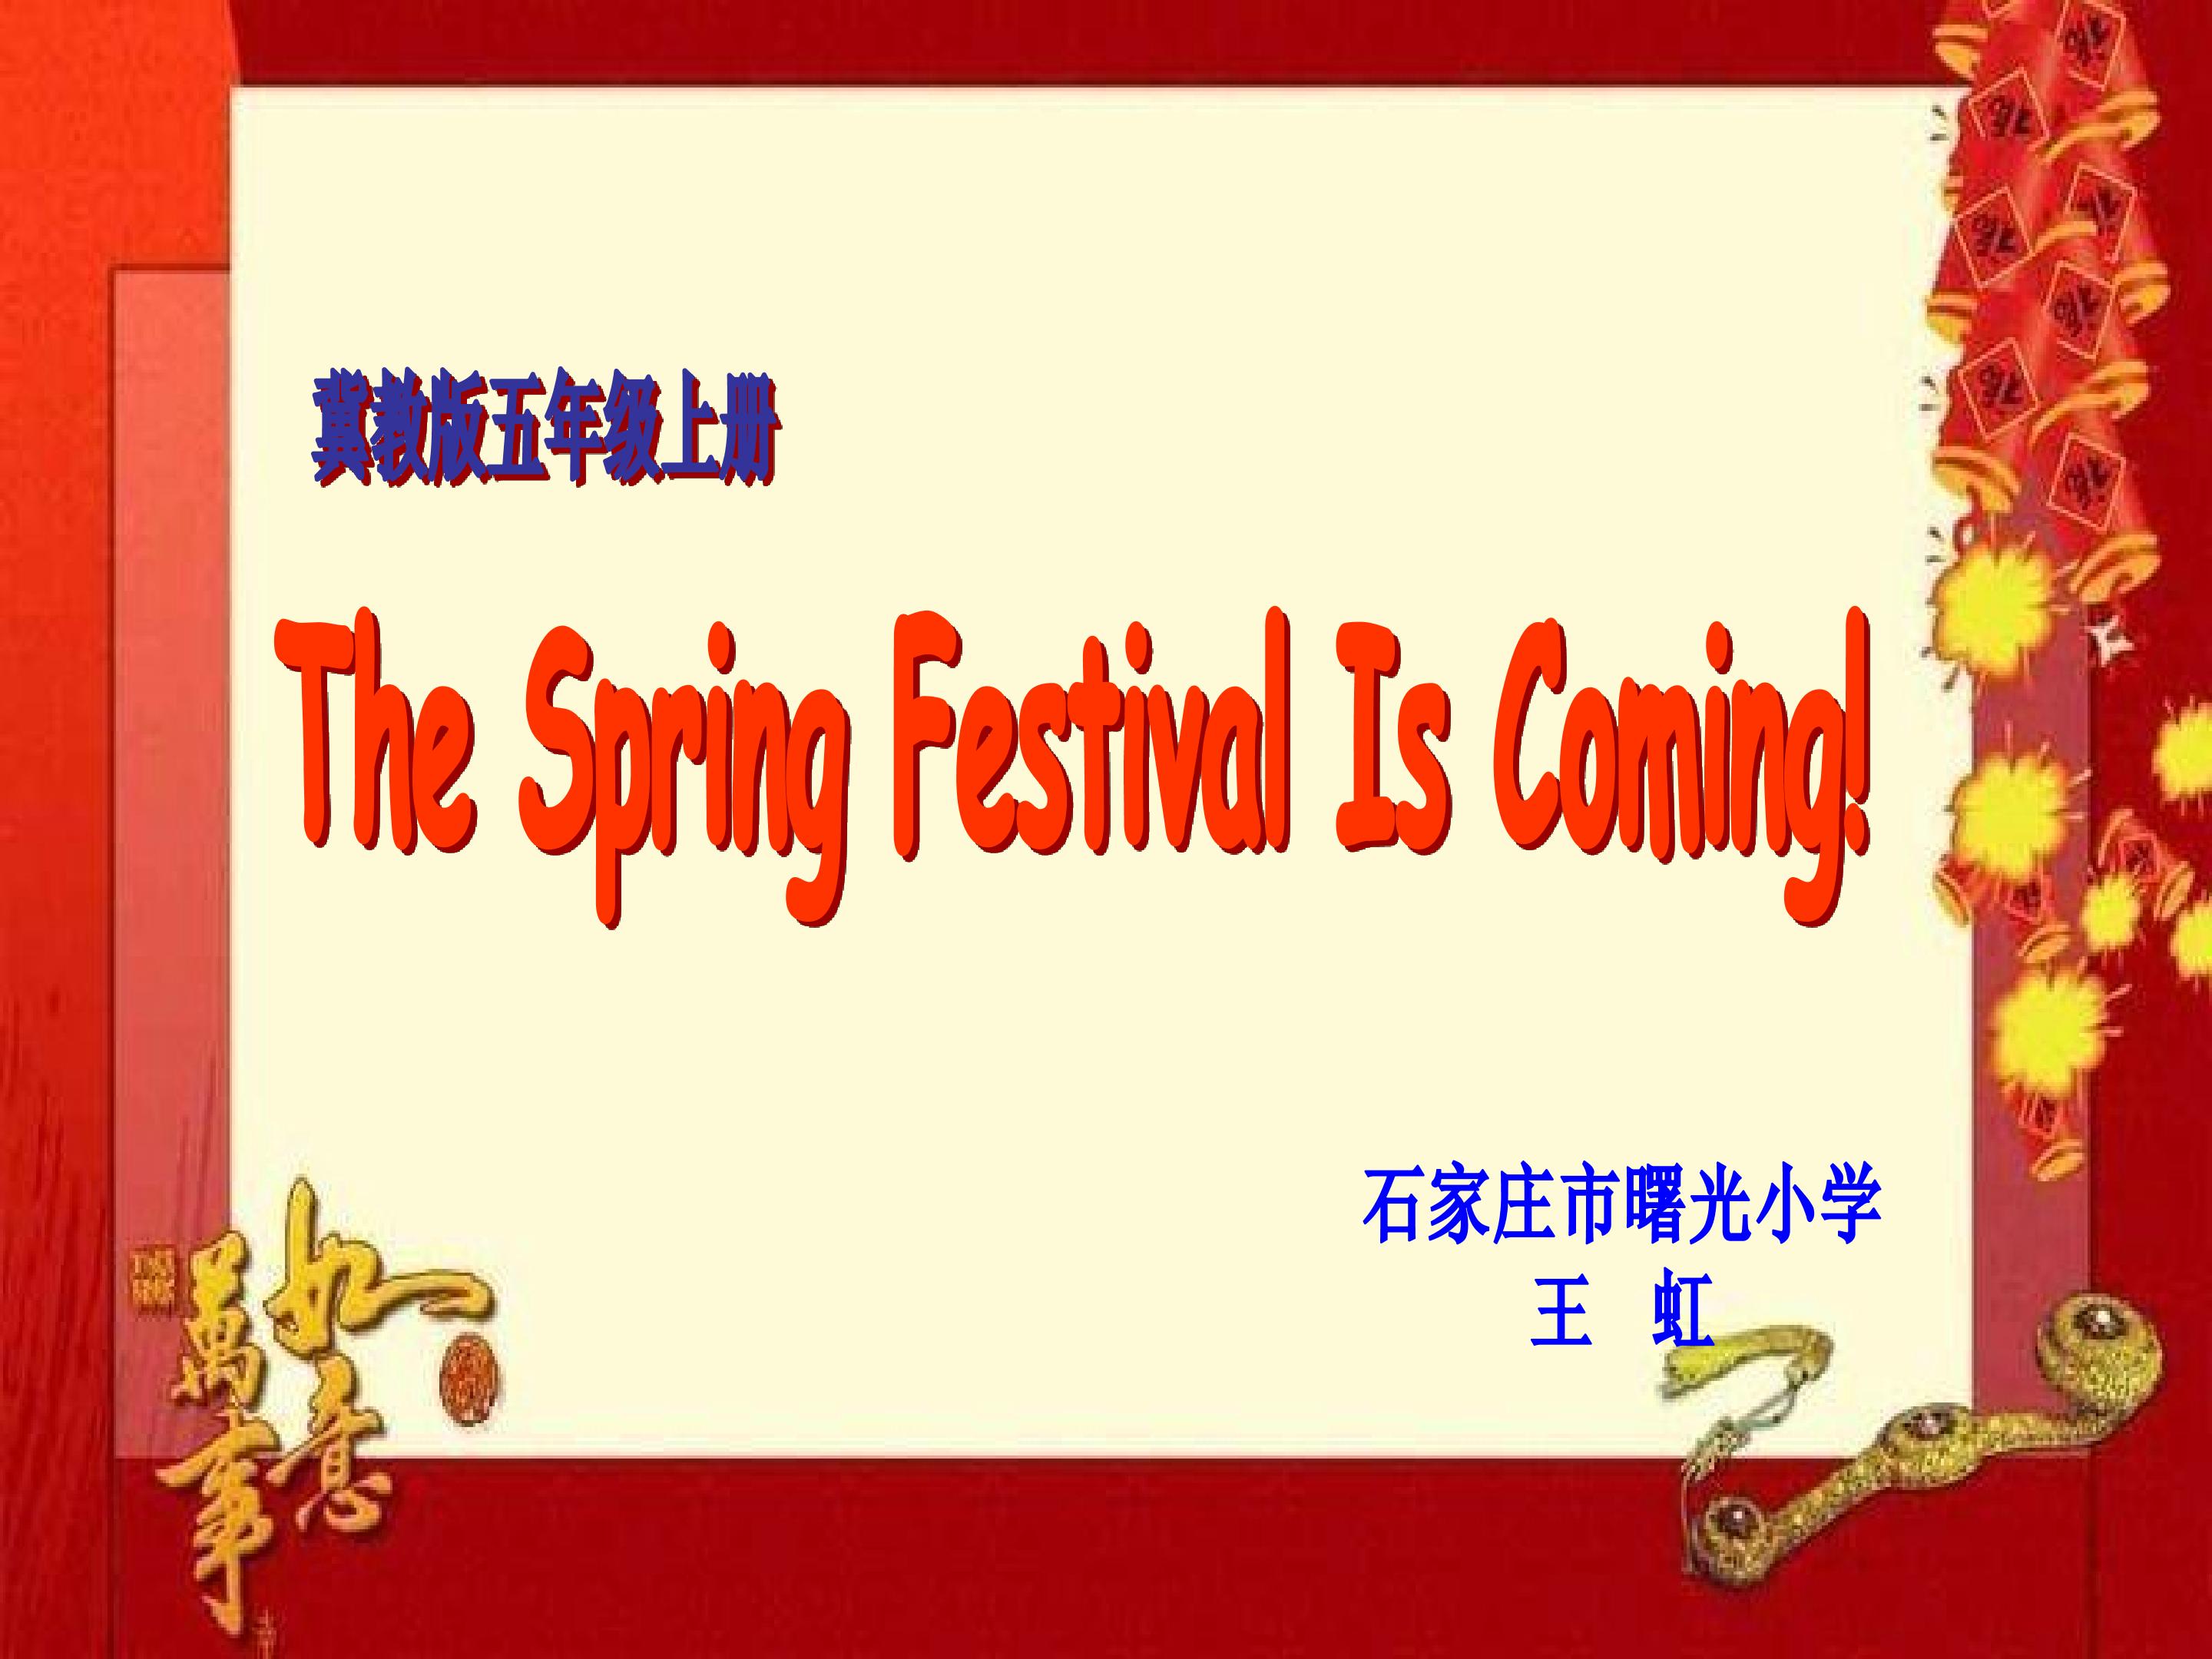 The Spring Festival Is Coming!